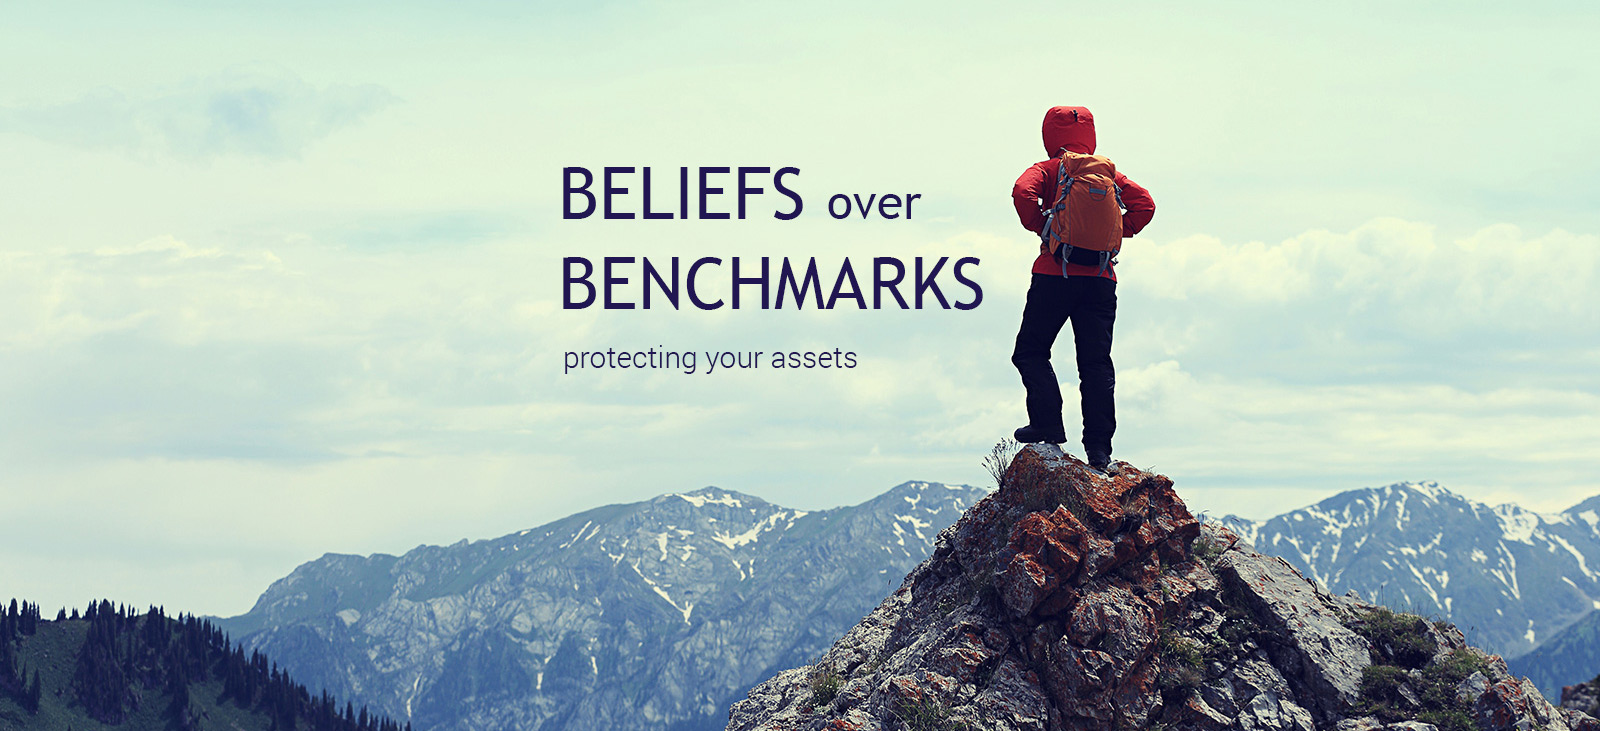 BELIEFS over BENCHMARKS - protecting your assets